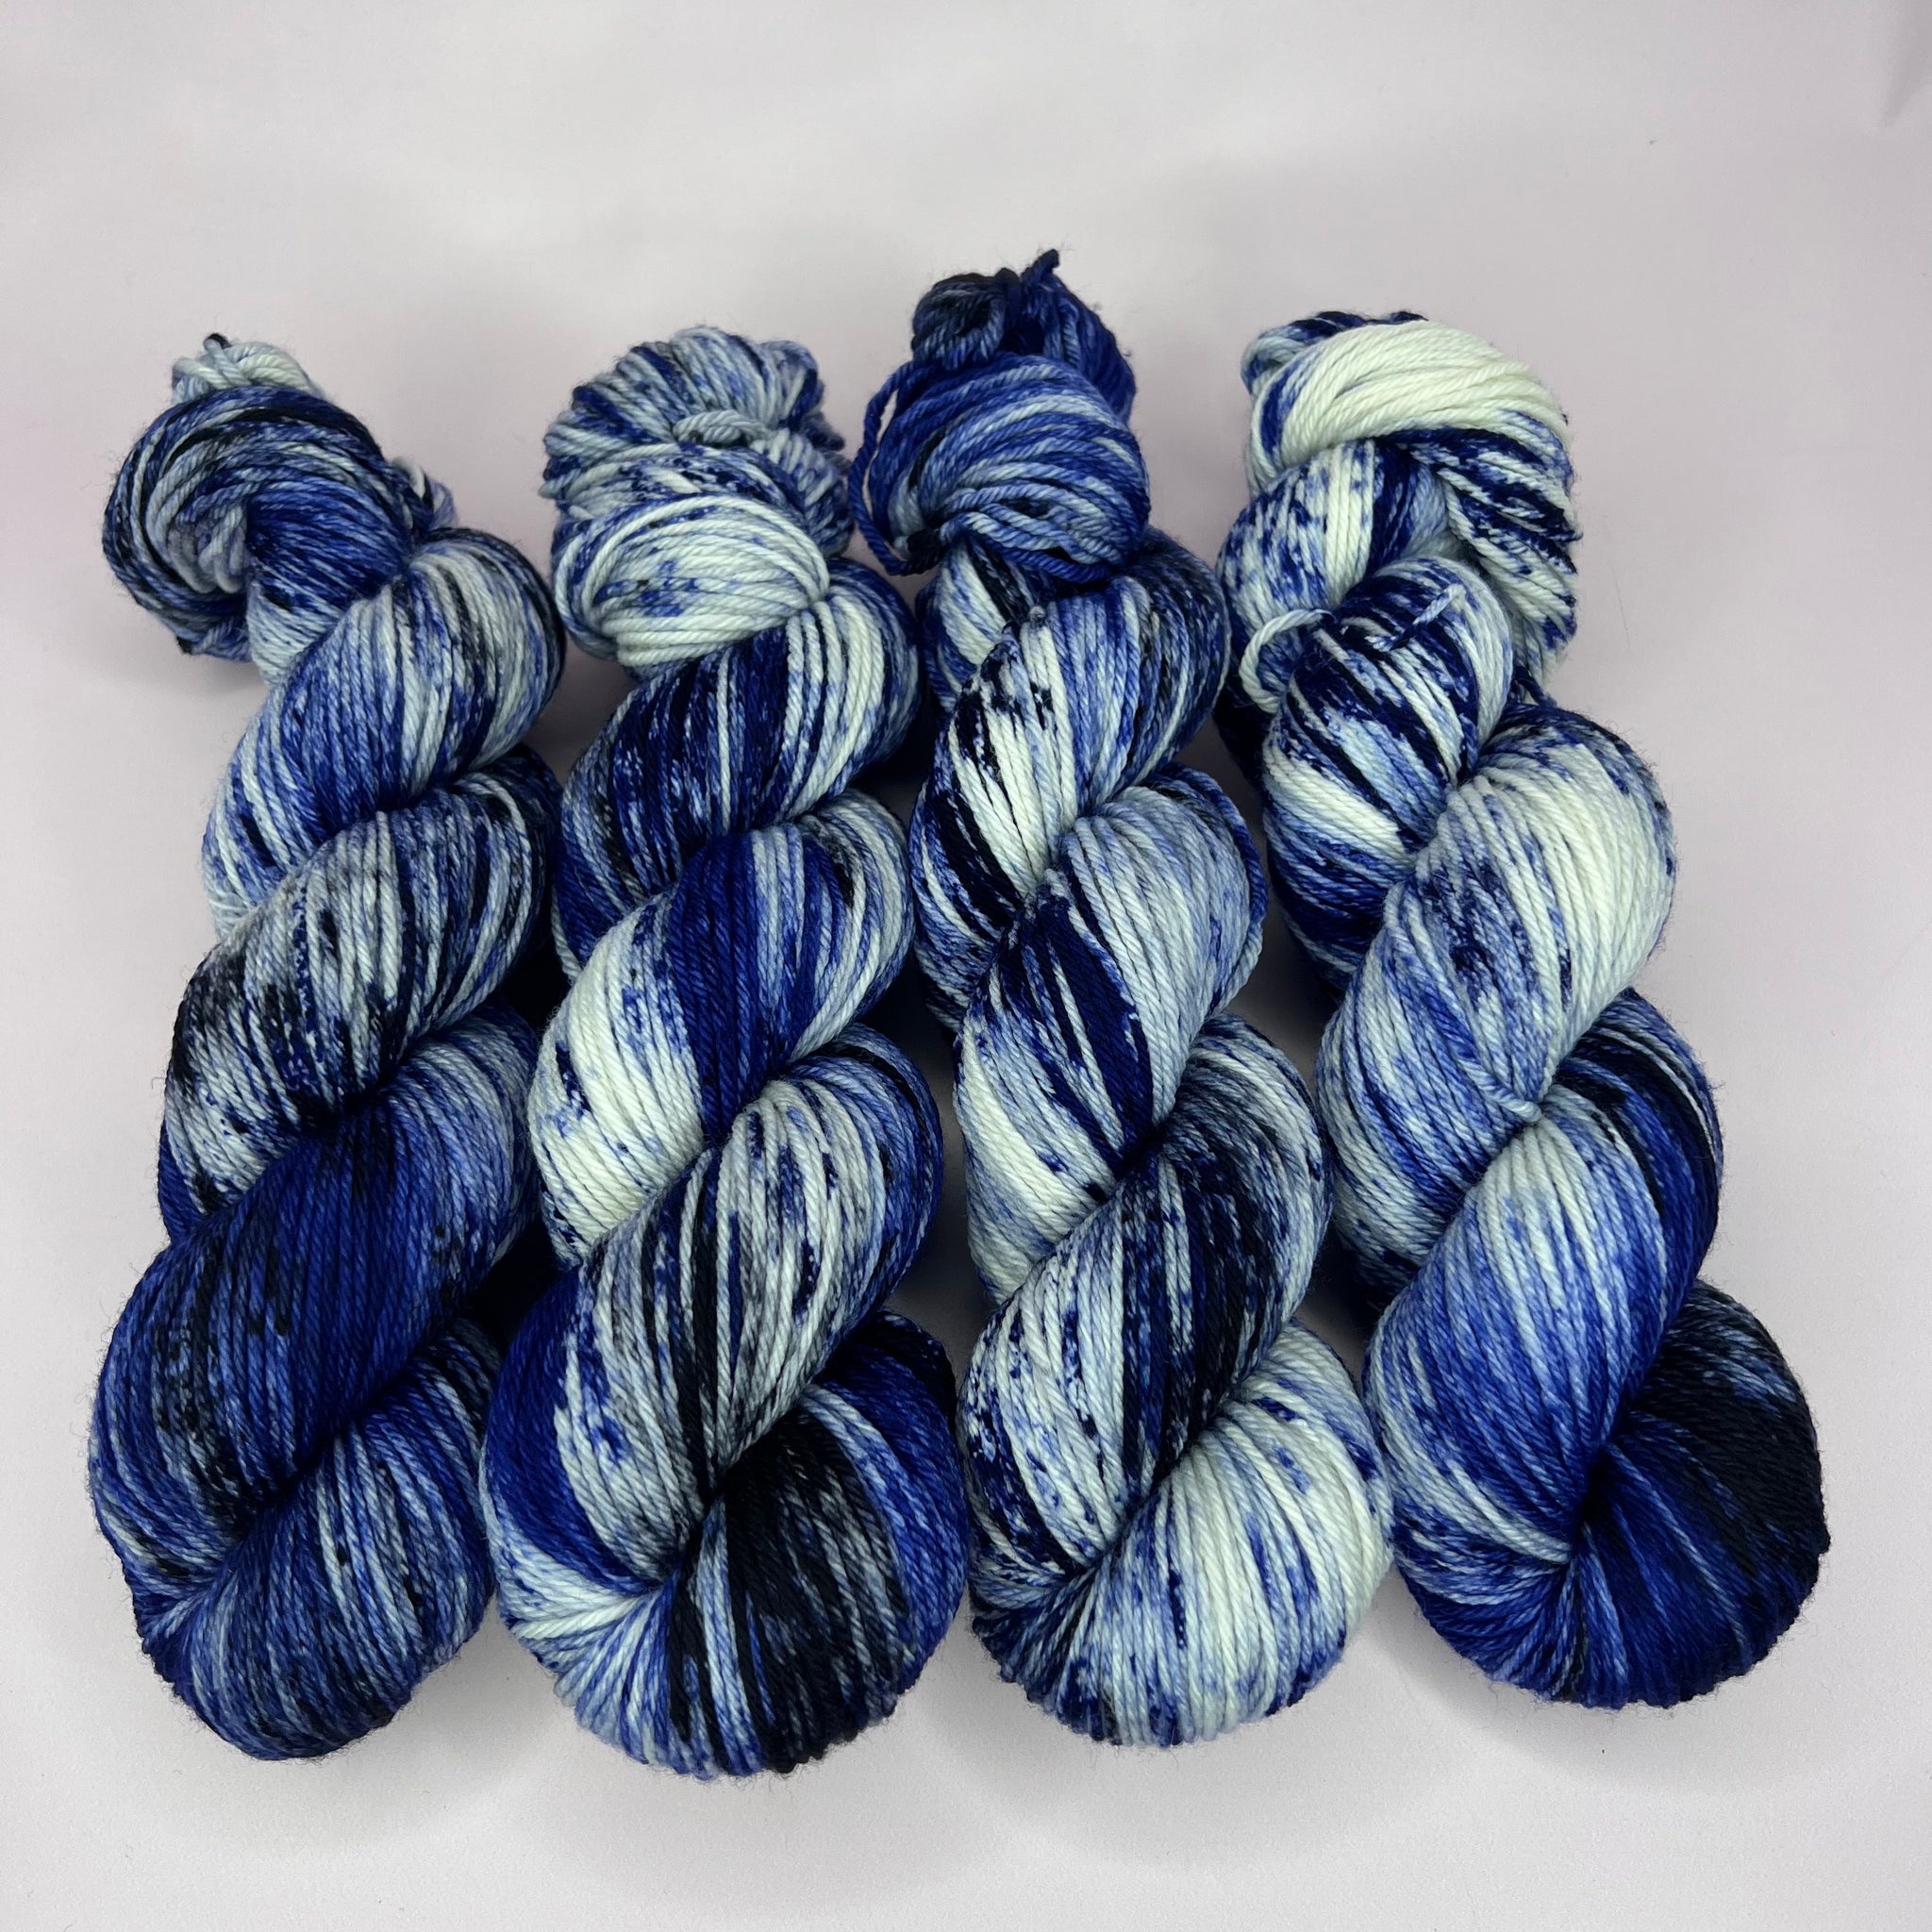 Dyed By Eloise - LOL colorway of the Month- Moonlight B.B.